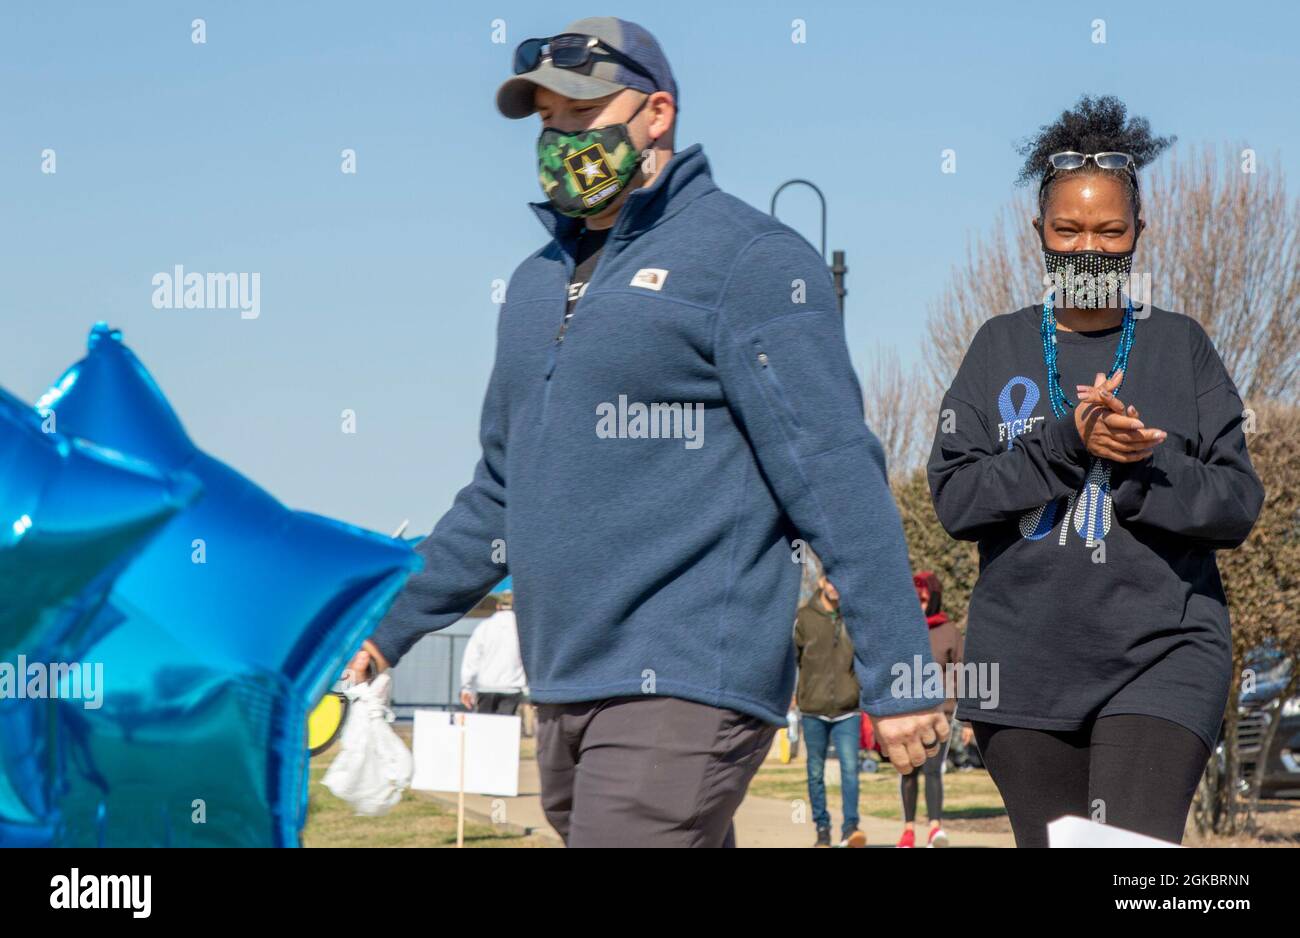 U.S. Army Soldier Sgt. 1st Class Jewel Lott, a colon cancer survivor and awareness organizer assigned to the 120th Infantry Brigade, Division West, walks across the finish line with one of her supporters, during a colon cancer awareness walk on March 6 at Lions Club Park, Killeen, Texas. While March is colon cancer awareness month, Lott has started a new journey of supporting her community by organizing an annual walk for colon cancer. Stock Photo